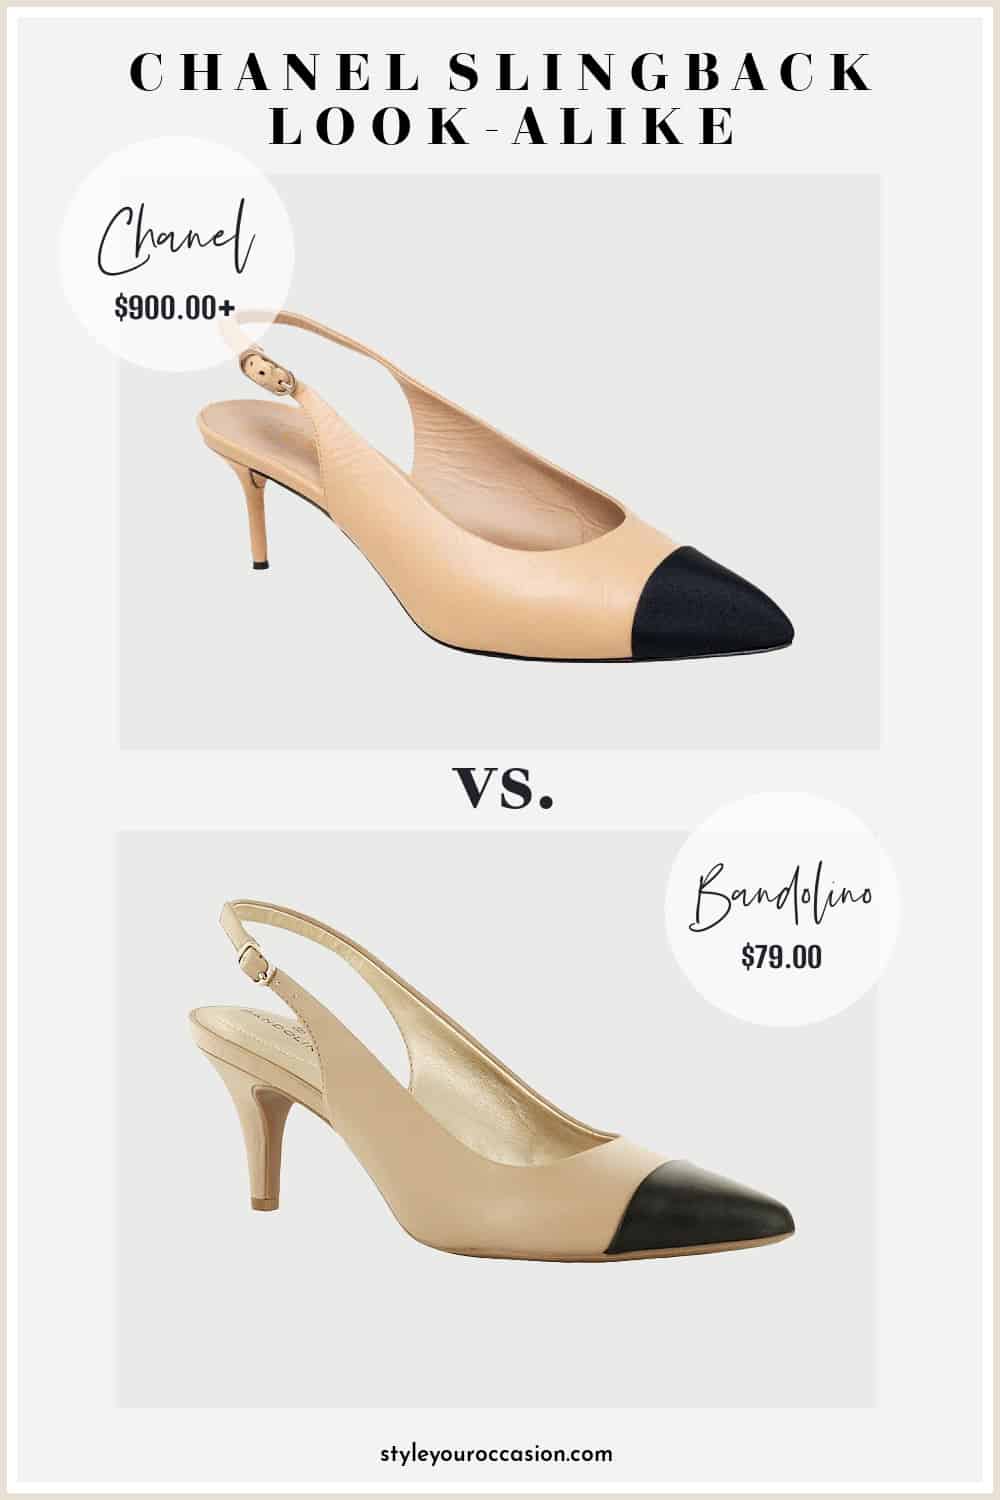 image comparing a vintage Chanel slingback pump with a look-alike shoe